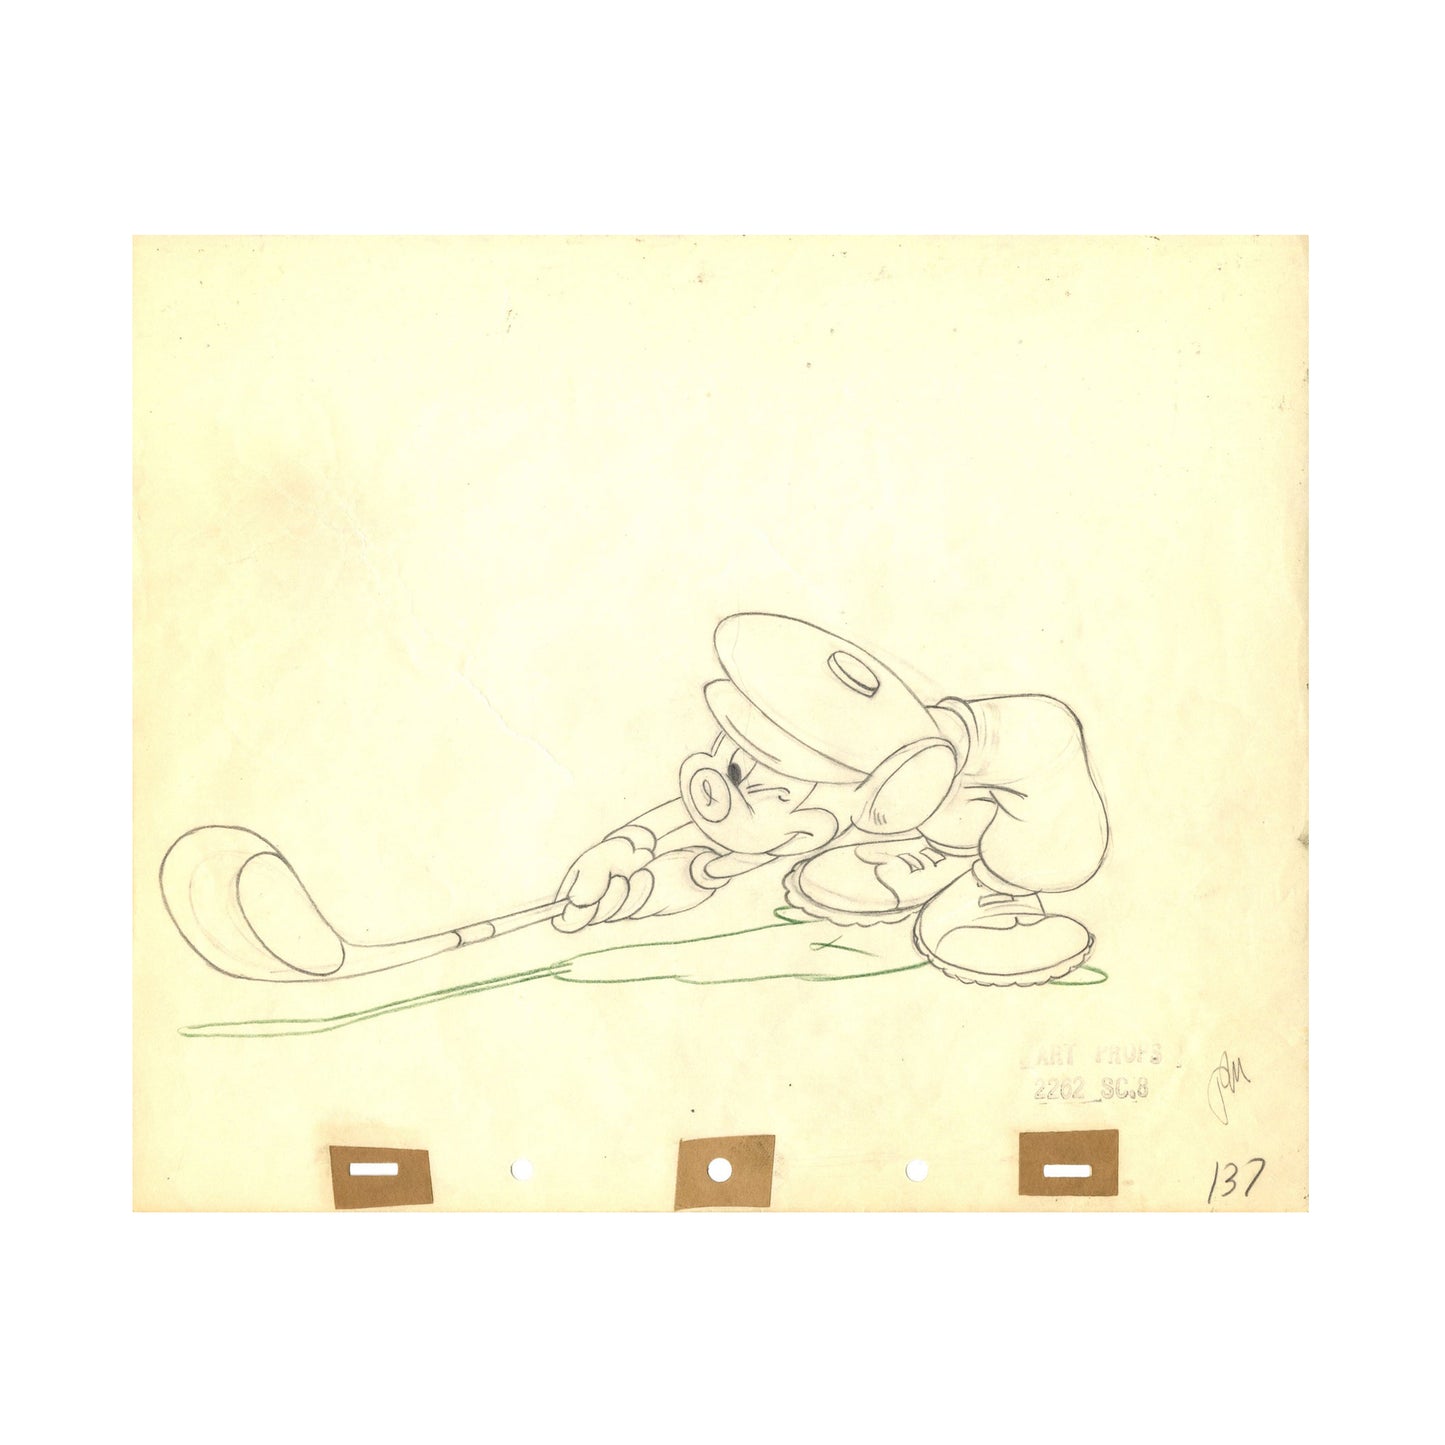 Mickey Mouse Canine Caddy Original Production Drawing